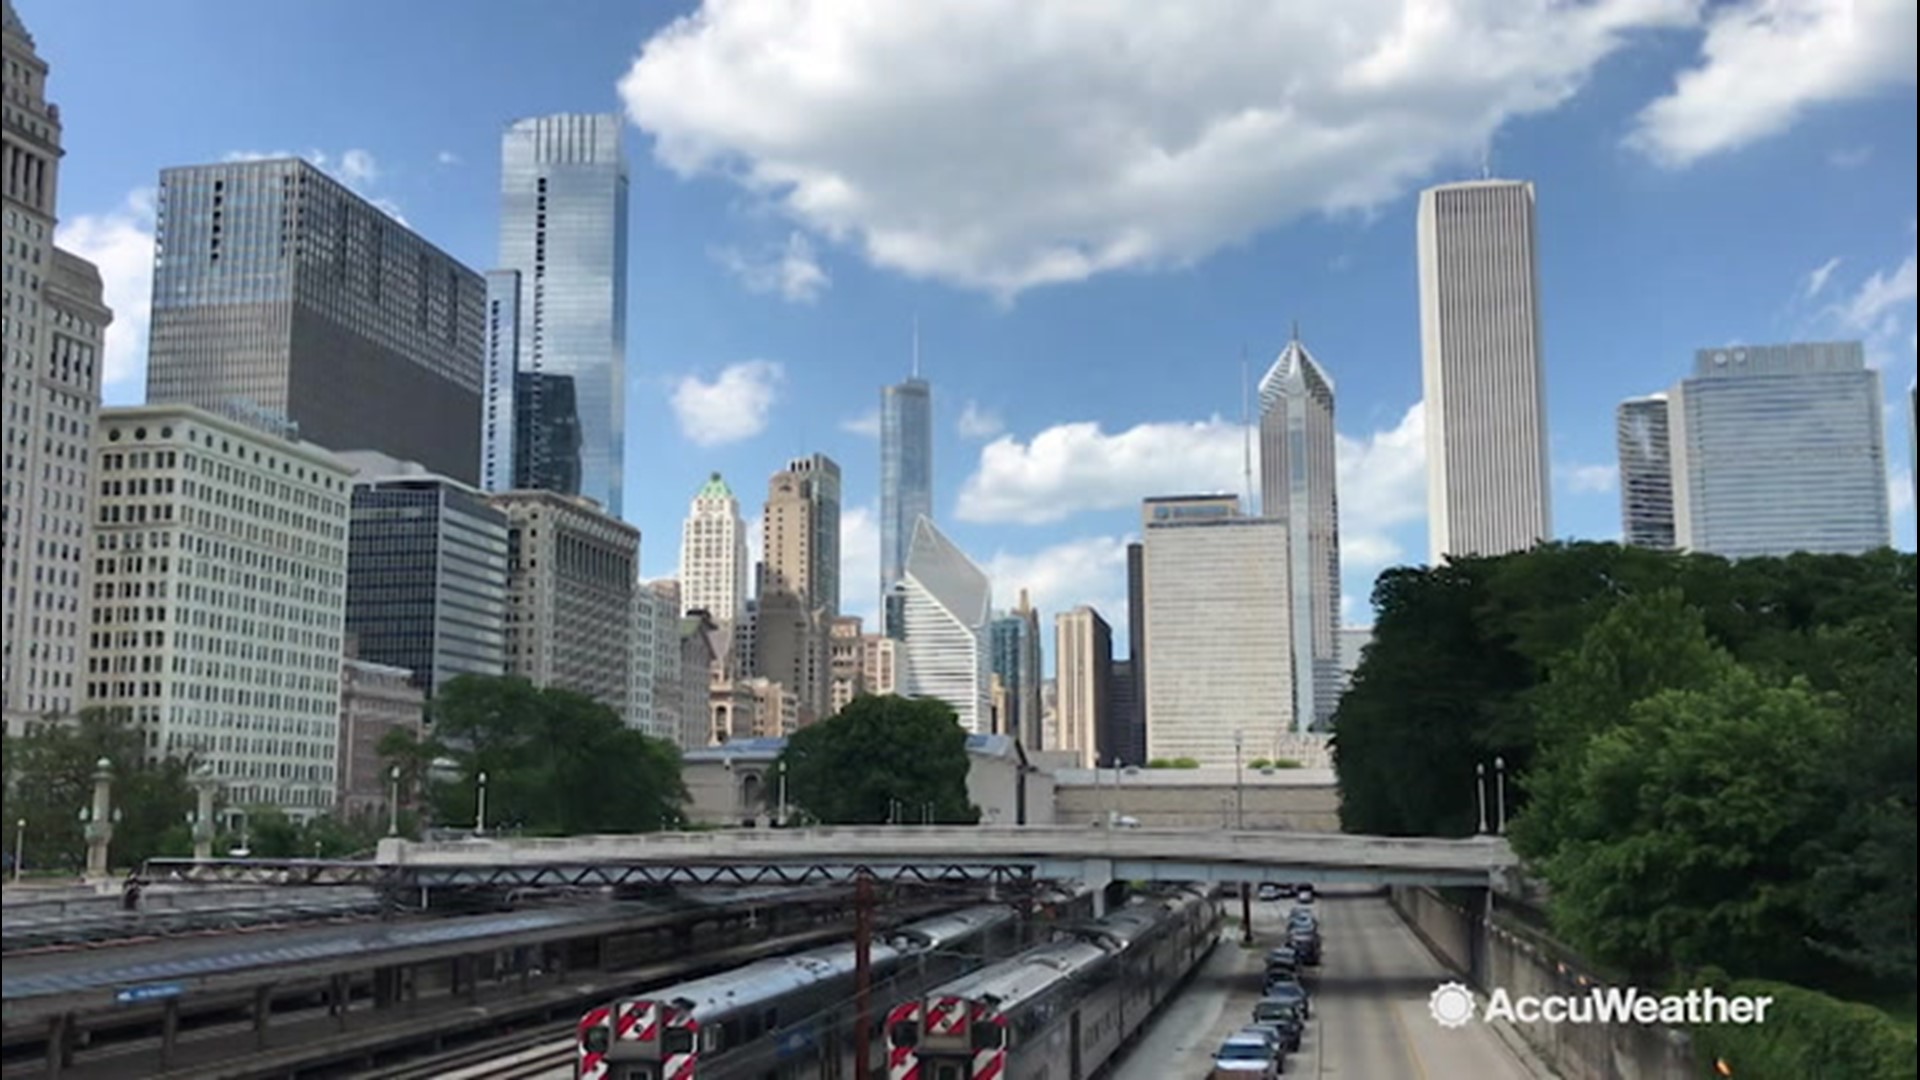 AccuWeather's Great American Road Trip continues as Lincoln Riddle visits Chicago, Illinois. He was lucky enough to show up on July 10, the same day that the Taste of Chicago food festival was happening.